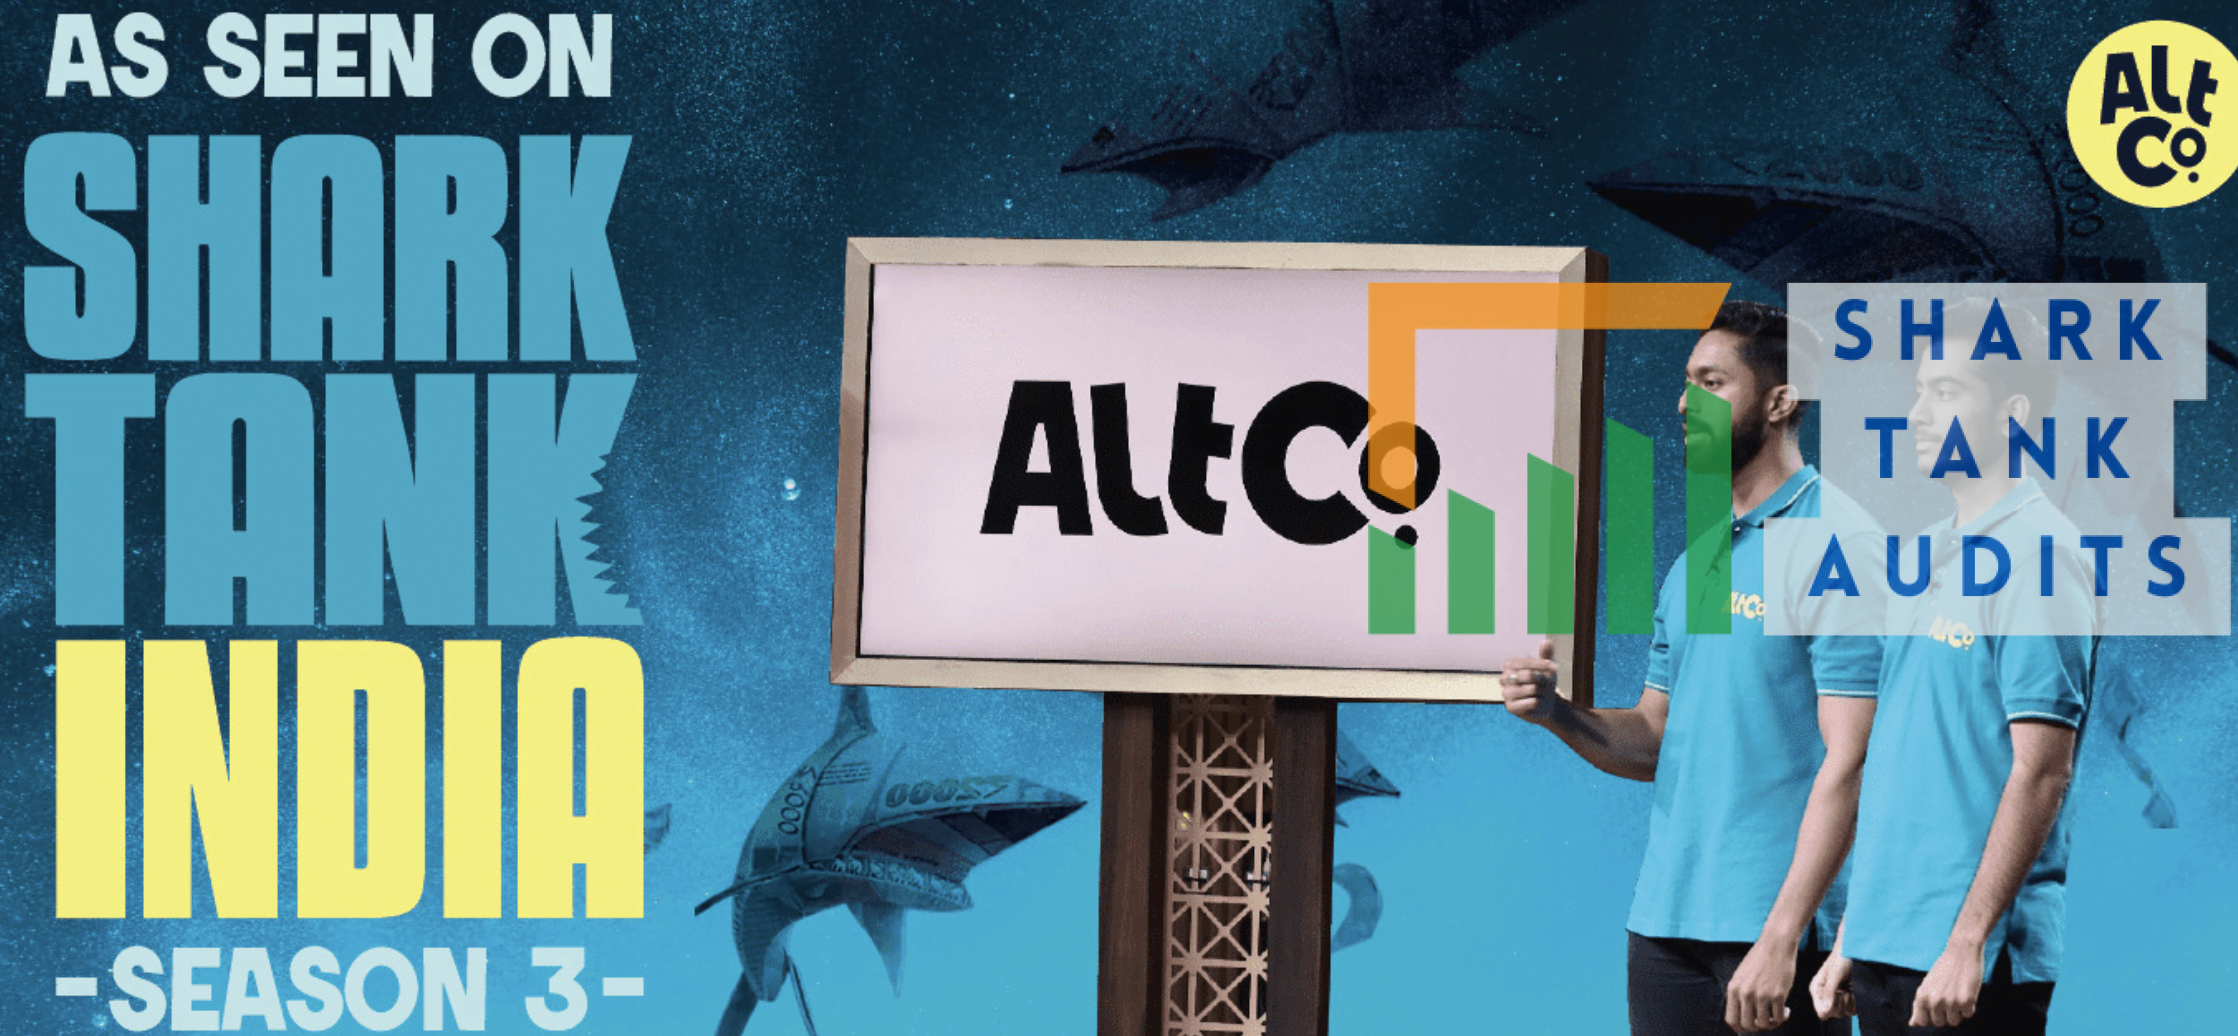 Altco Shark Tank India Episode Review